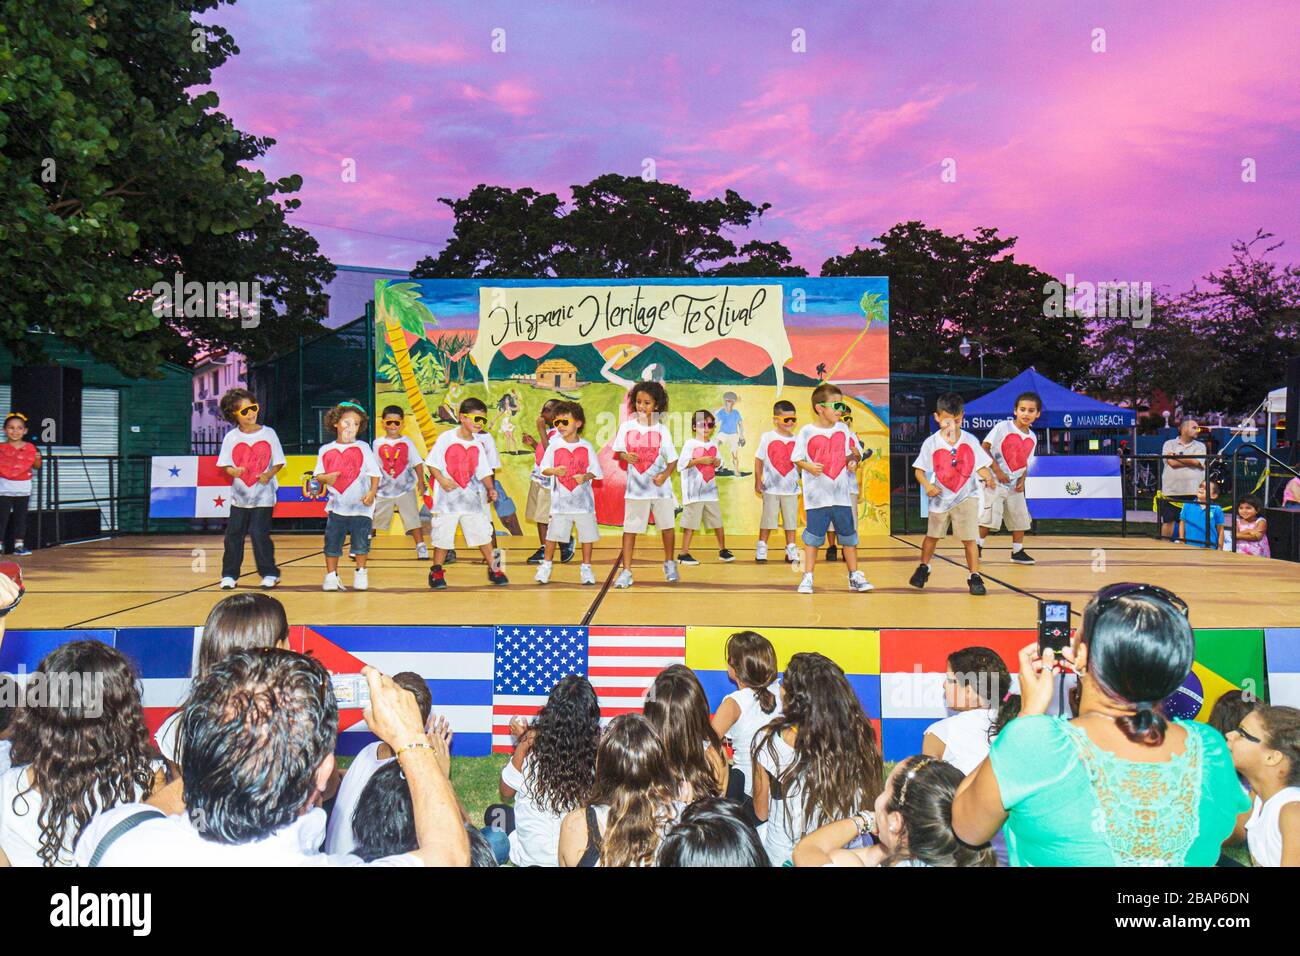 Miami Beach Florida,Hispanic Heritage Festival,stage dancing boys kids children 1st first graders,Latin American flags audience watching performance Stock Photo